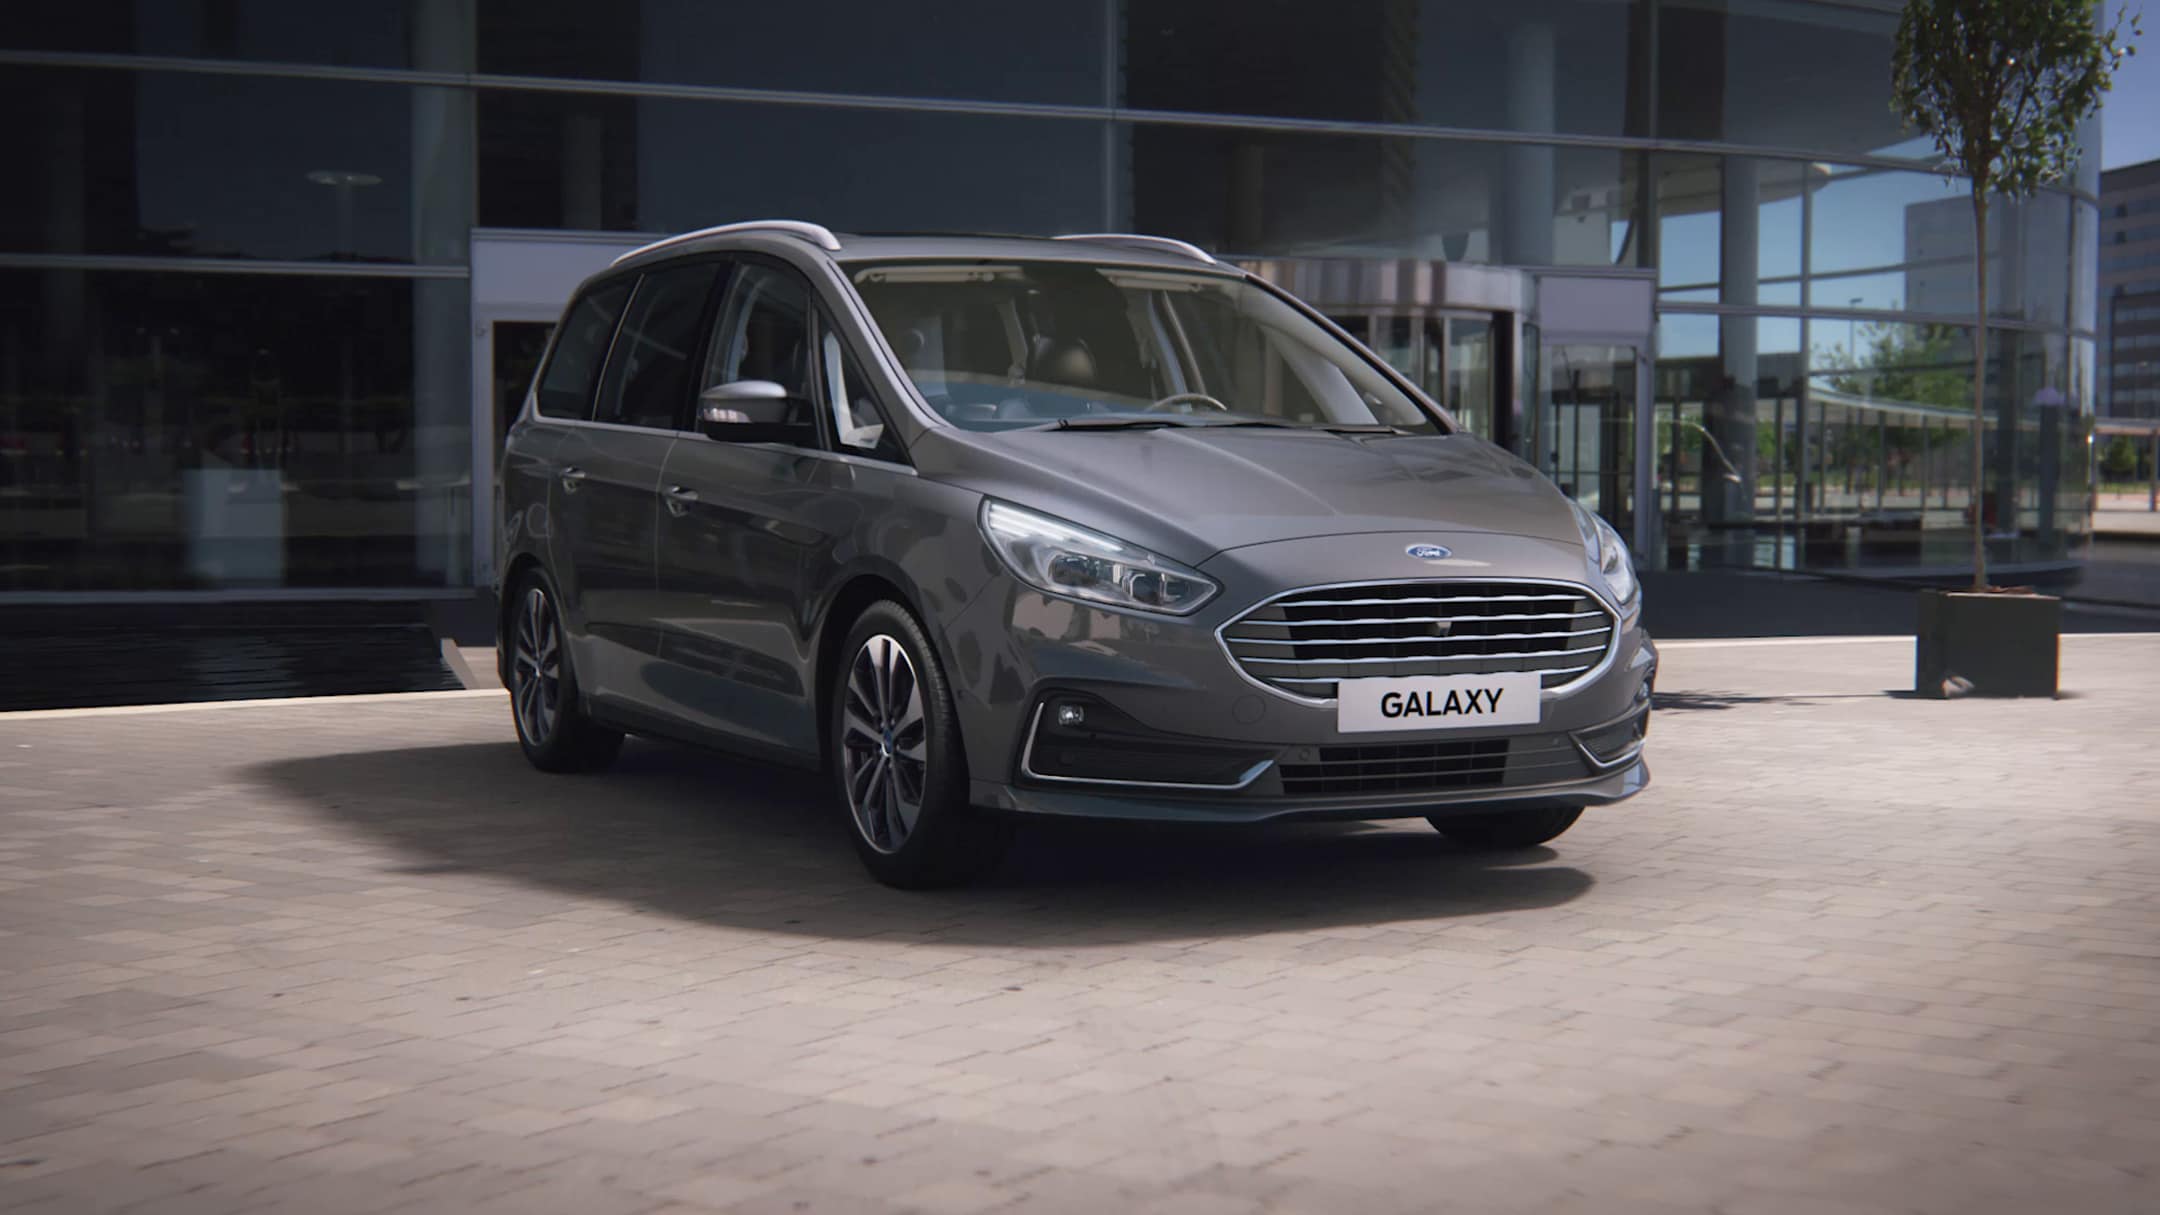 Ford Galaxy (2020) - pictures, information & specs